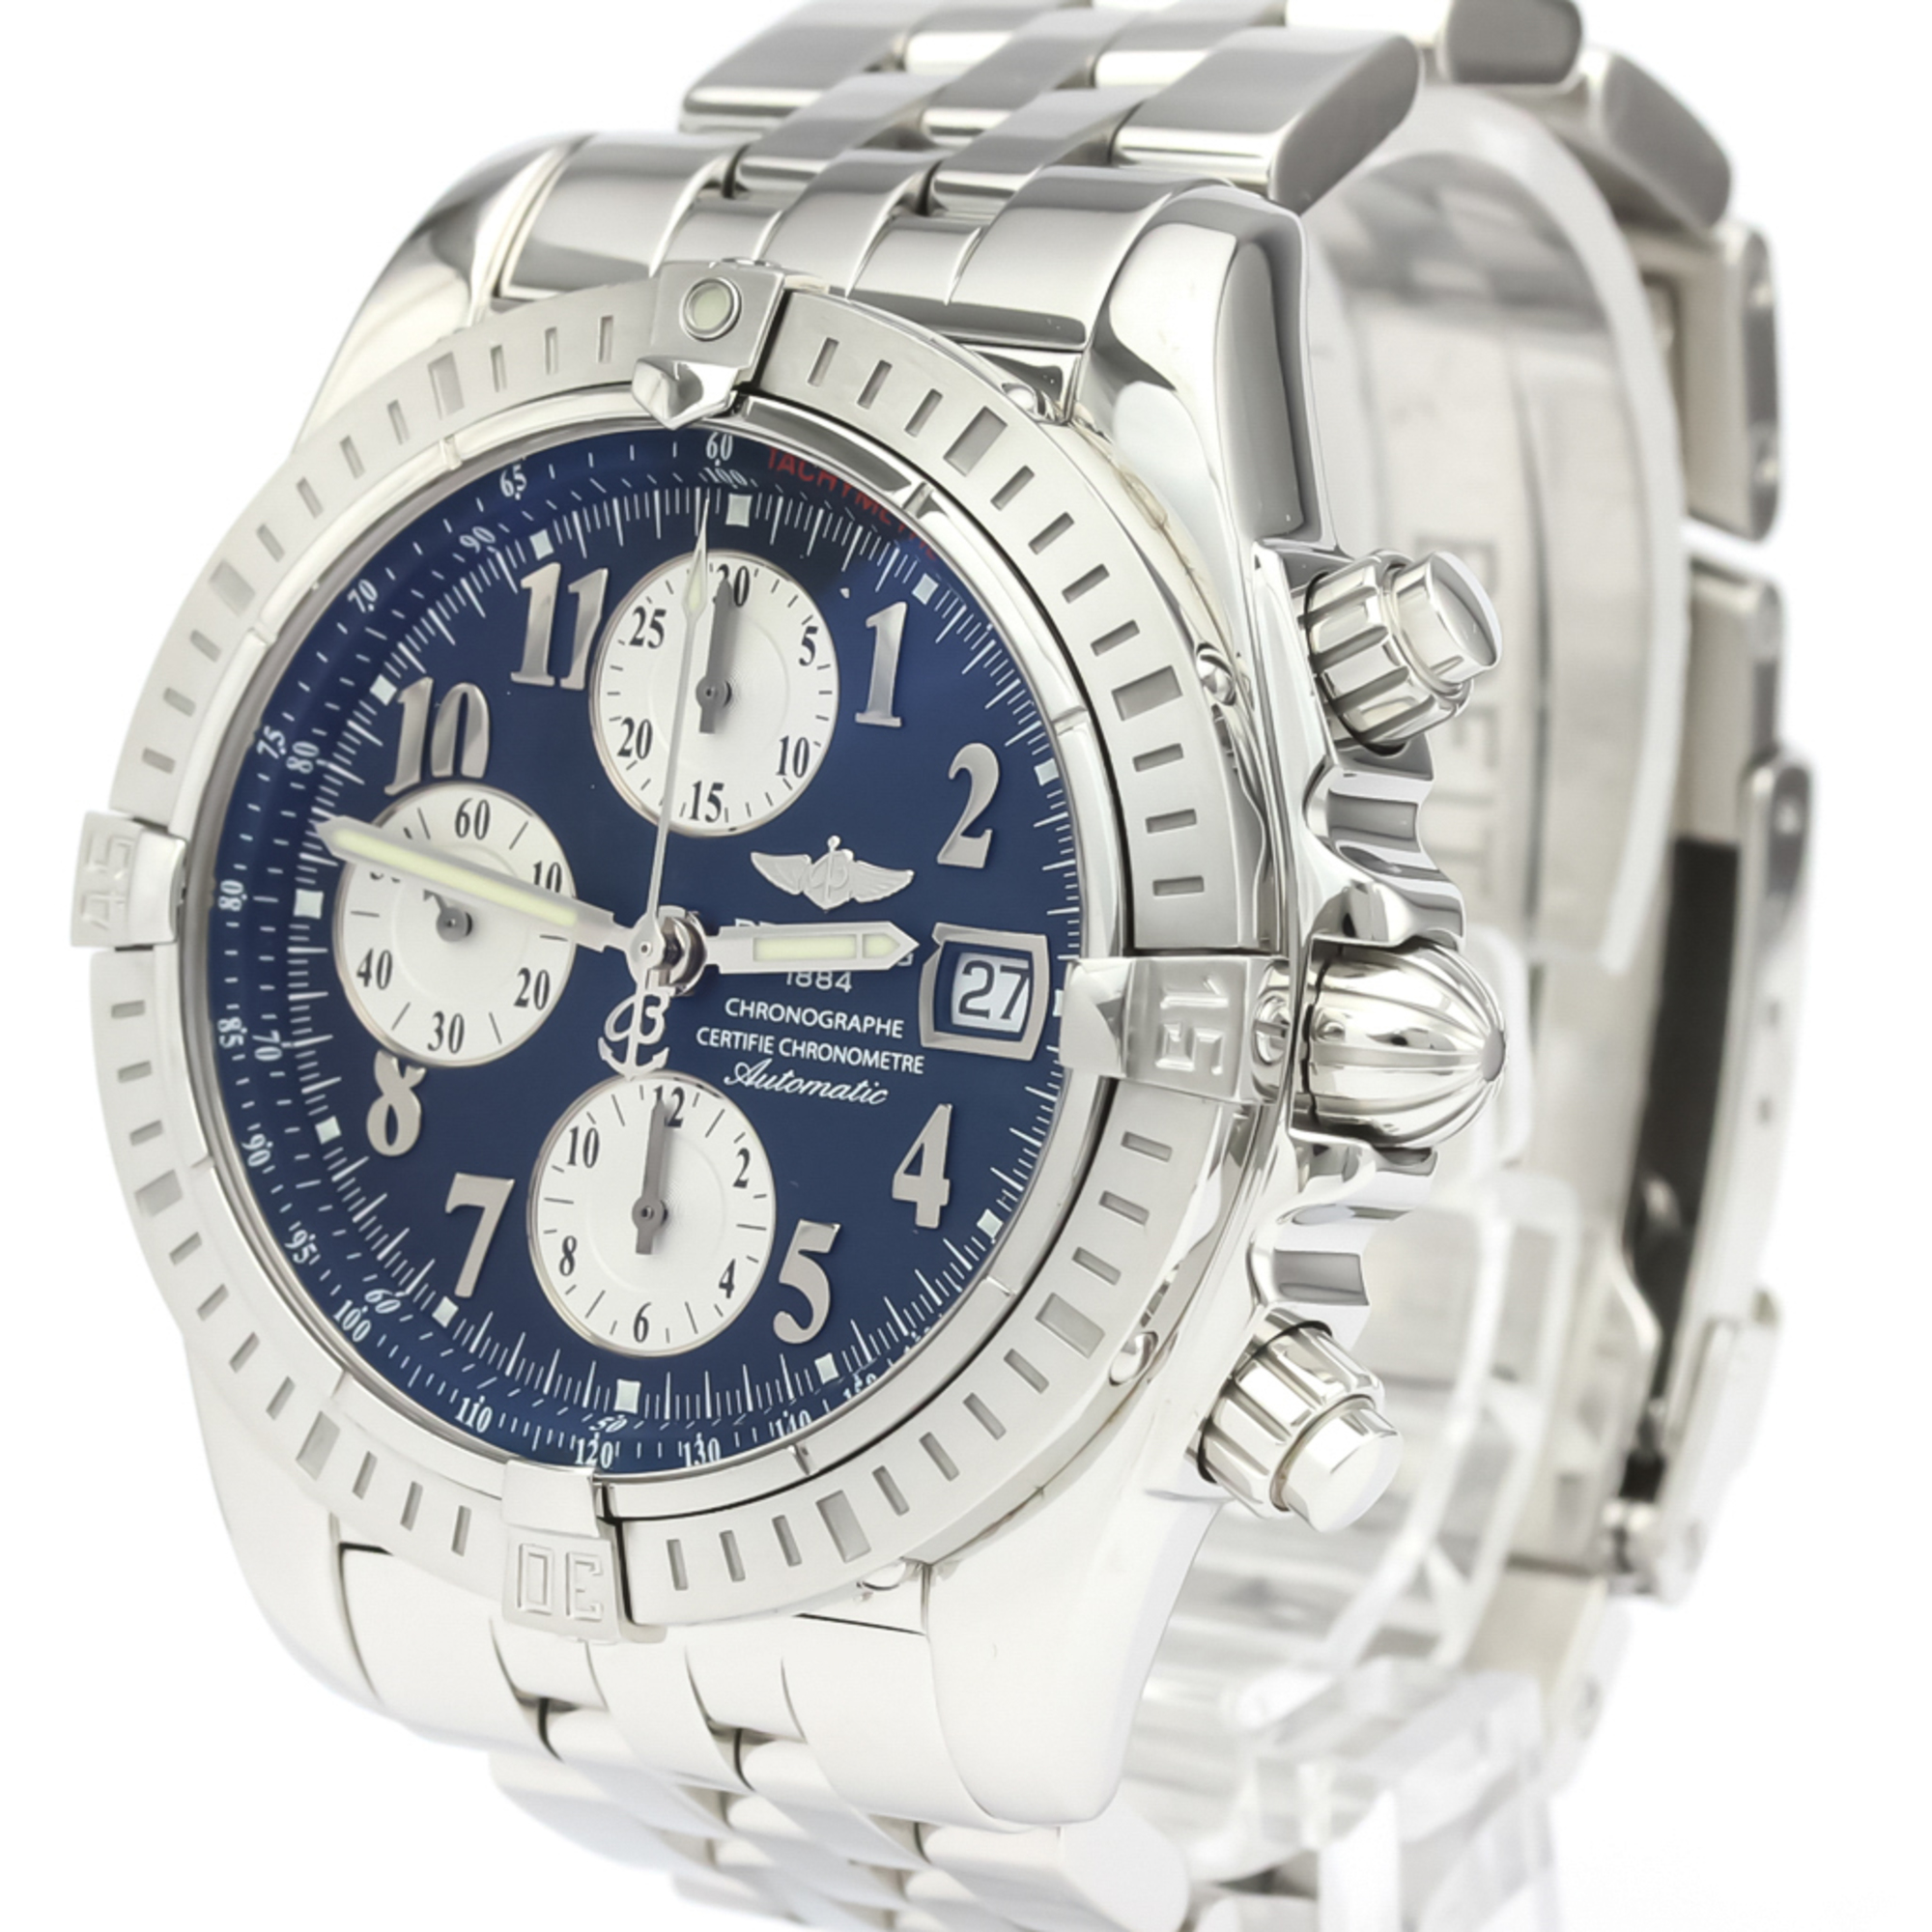 Breitling Chronomat Automatic Stainless Steel Men's Sports Watch A13356